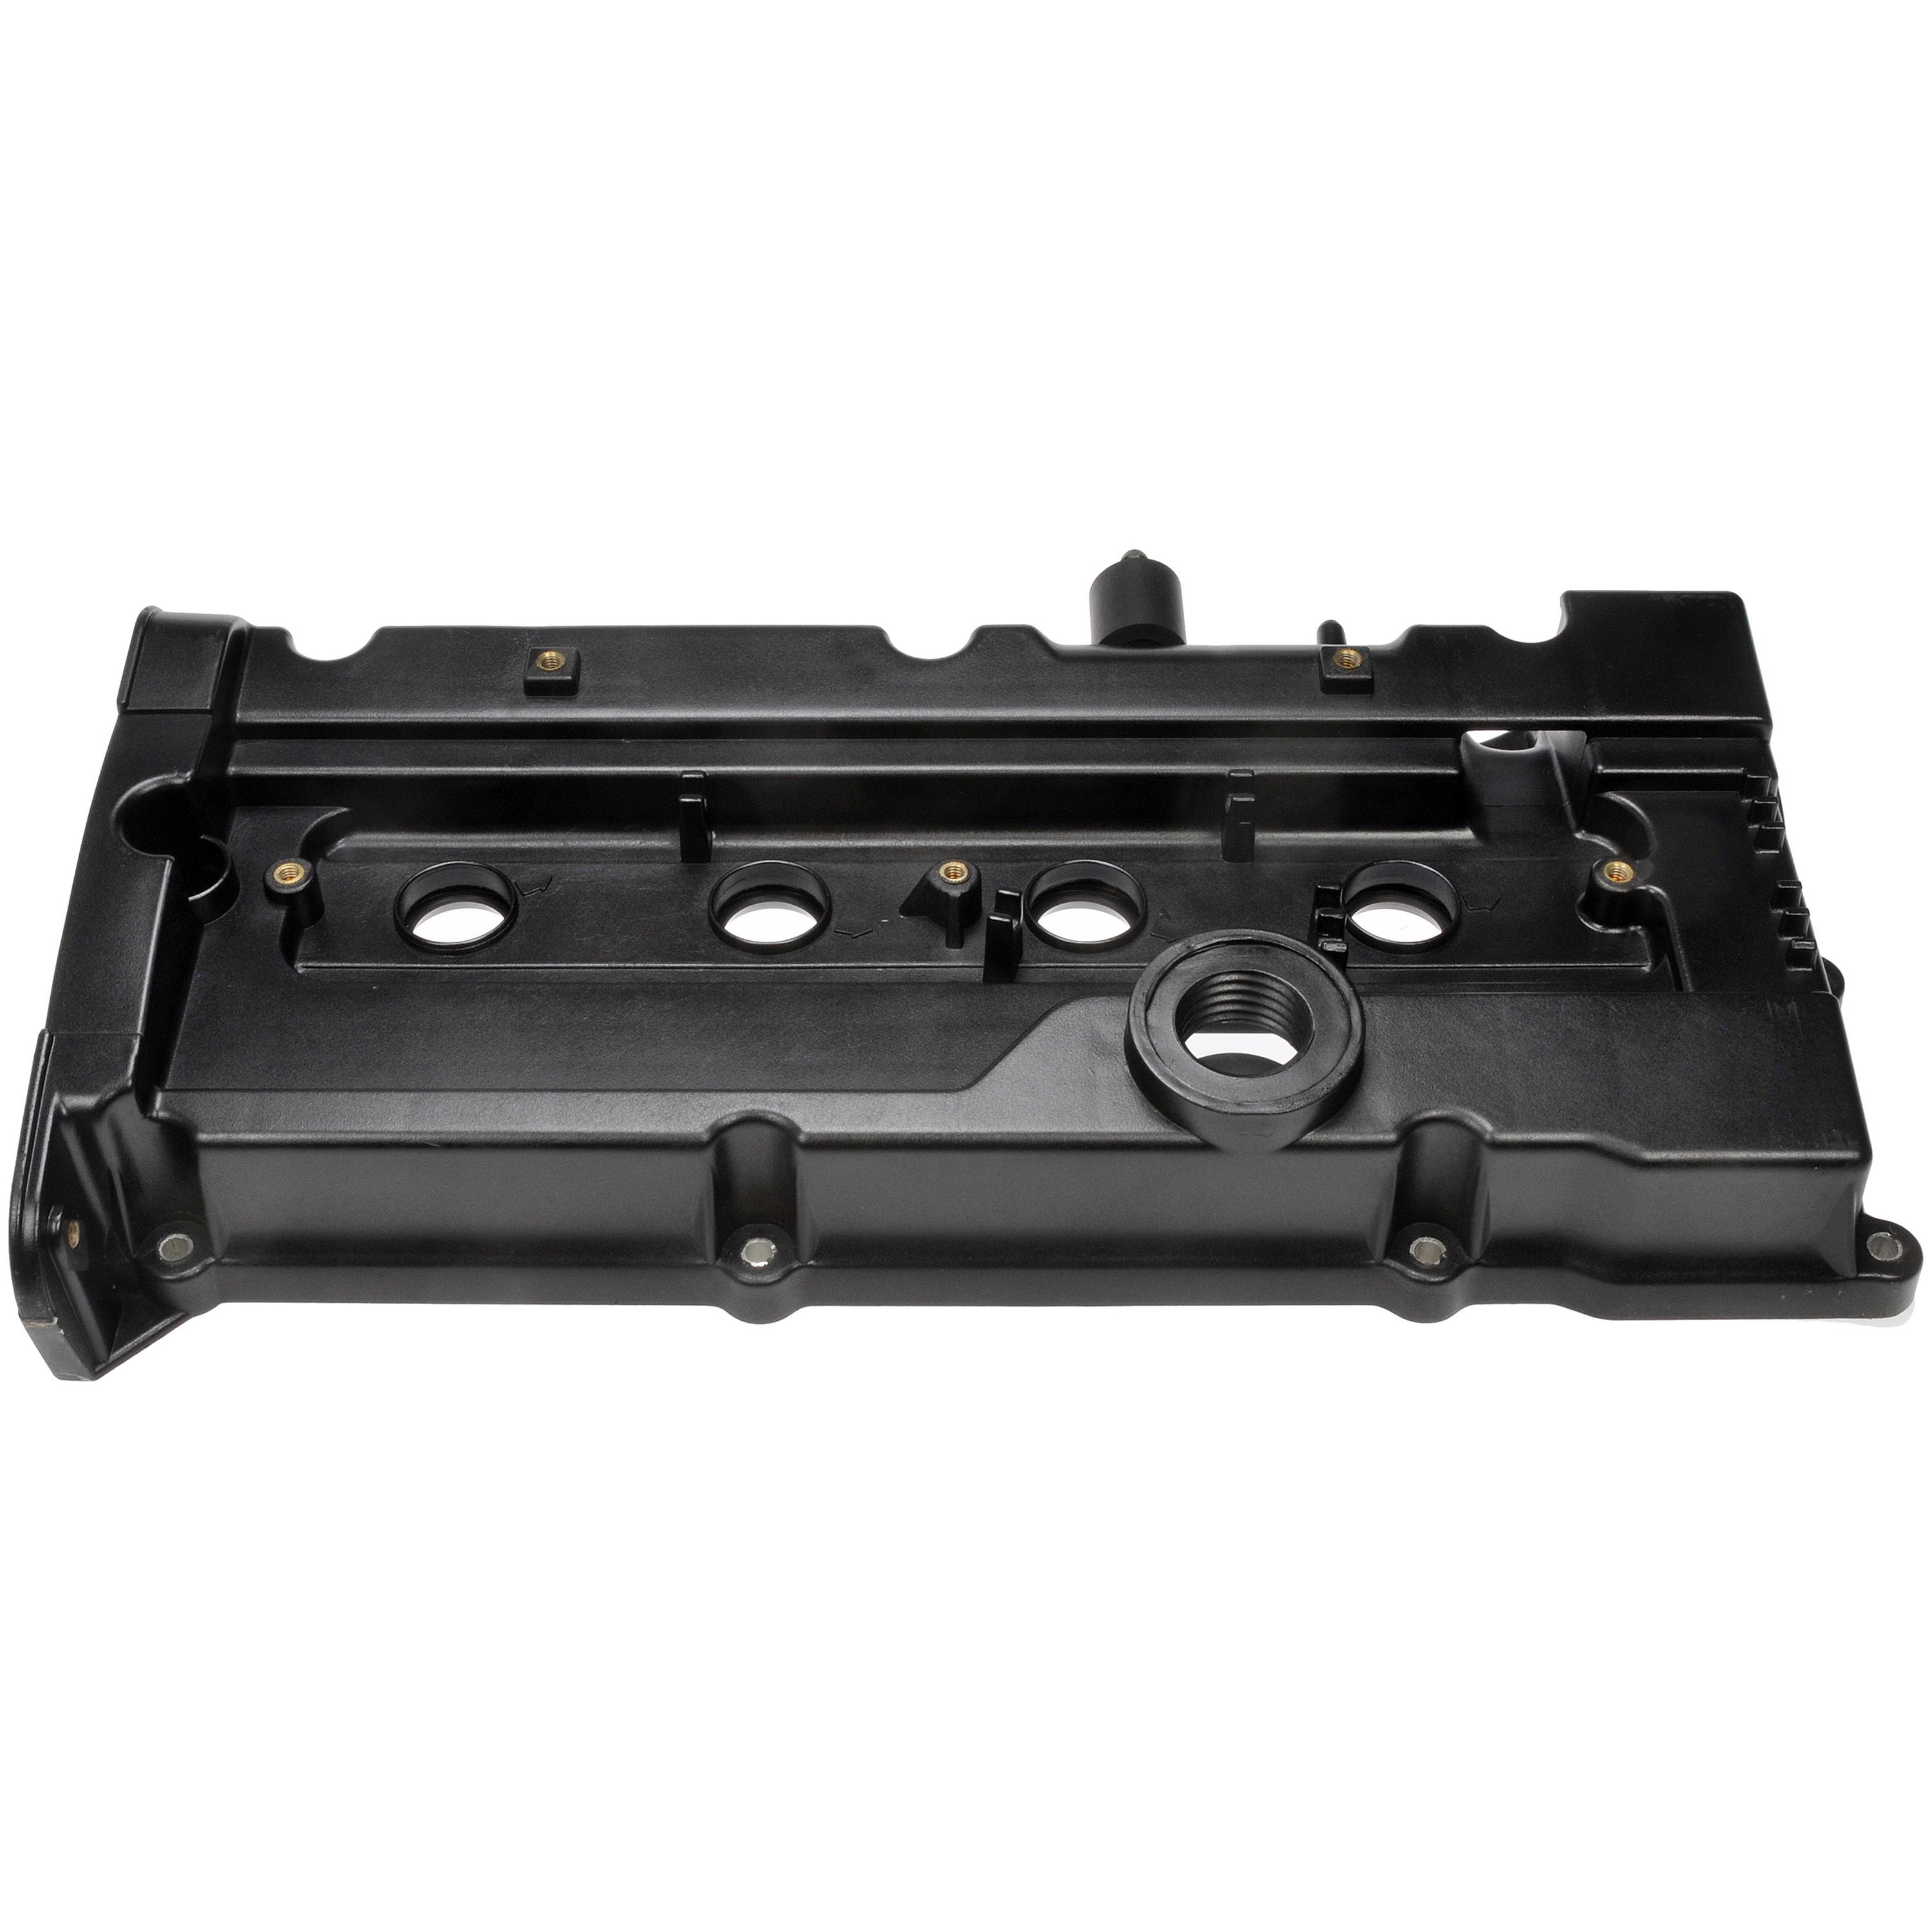 Dorman 917-026 Engine Valve Cover for Specific Dodge Hyundai Models Fits  2002 Hyundai Accent